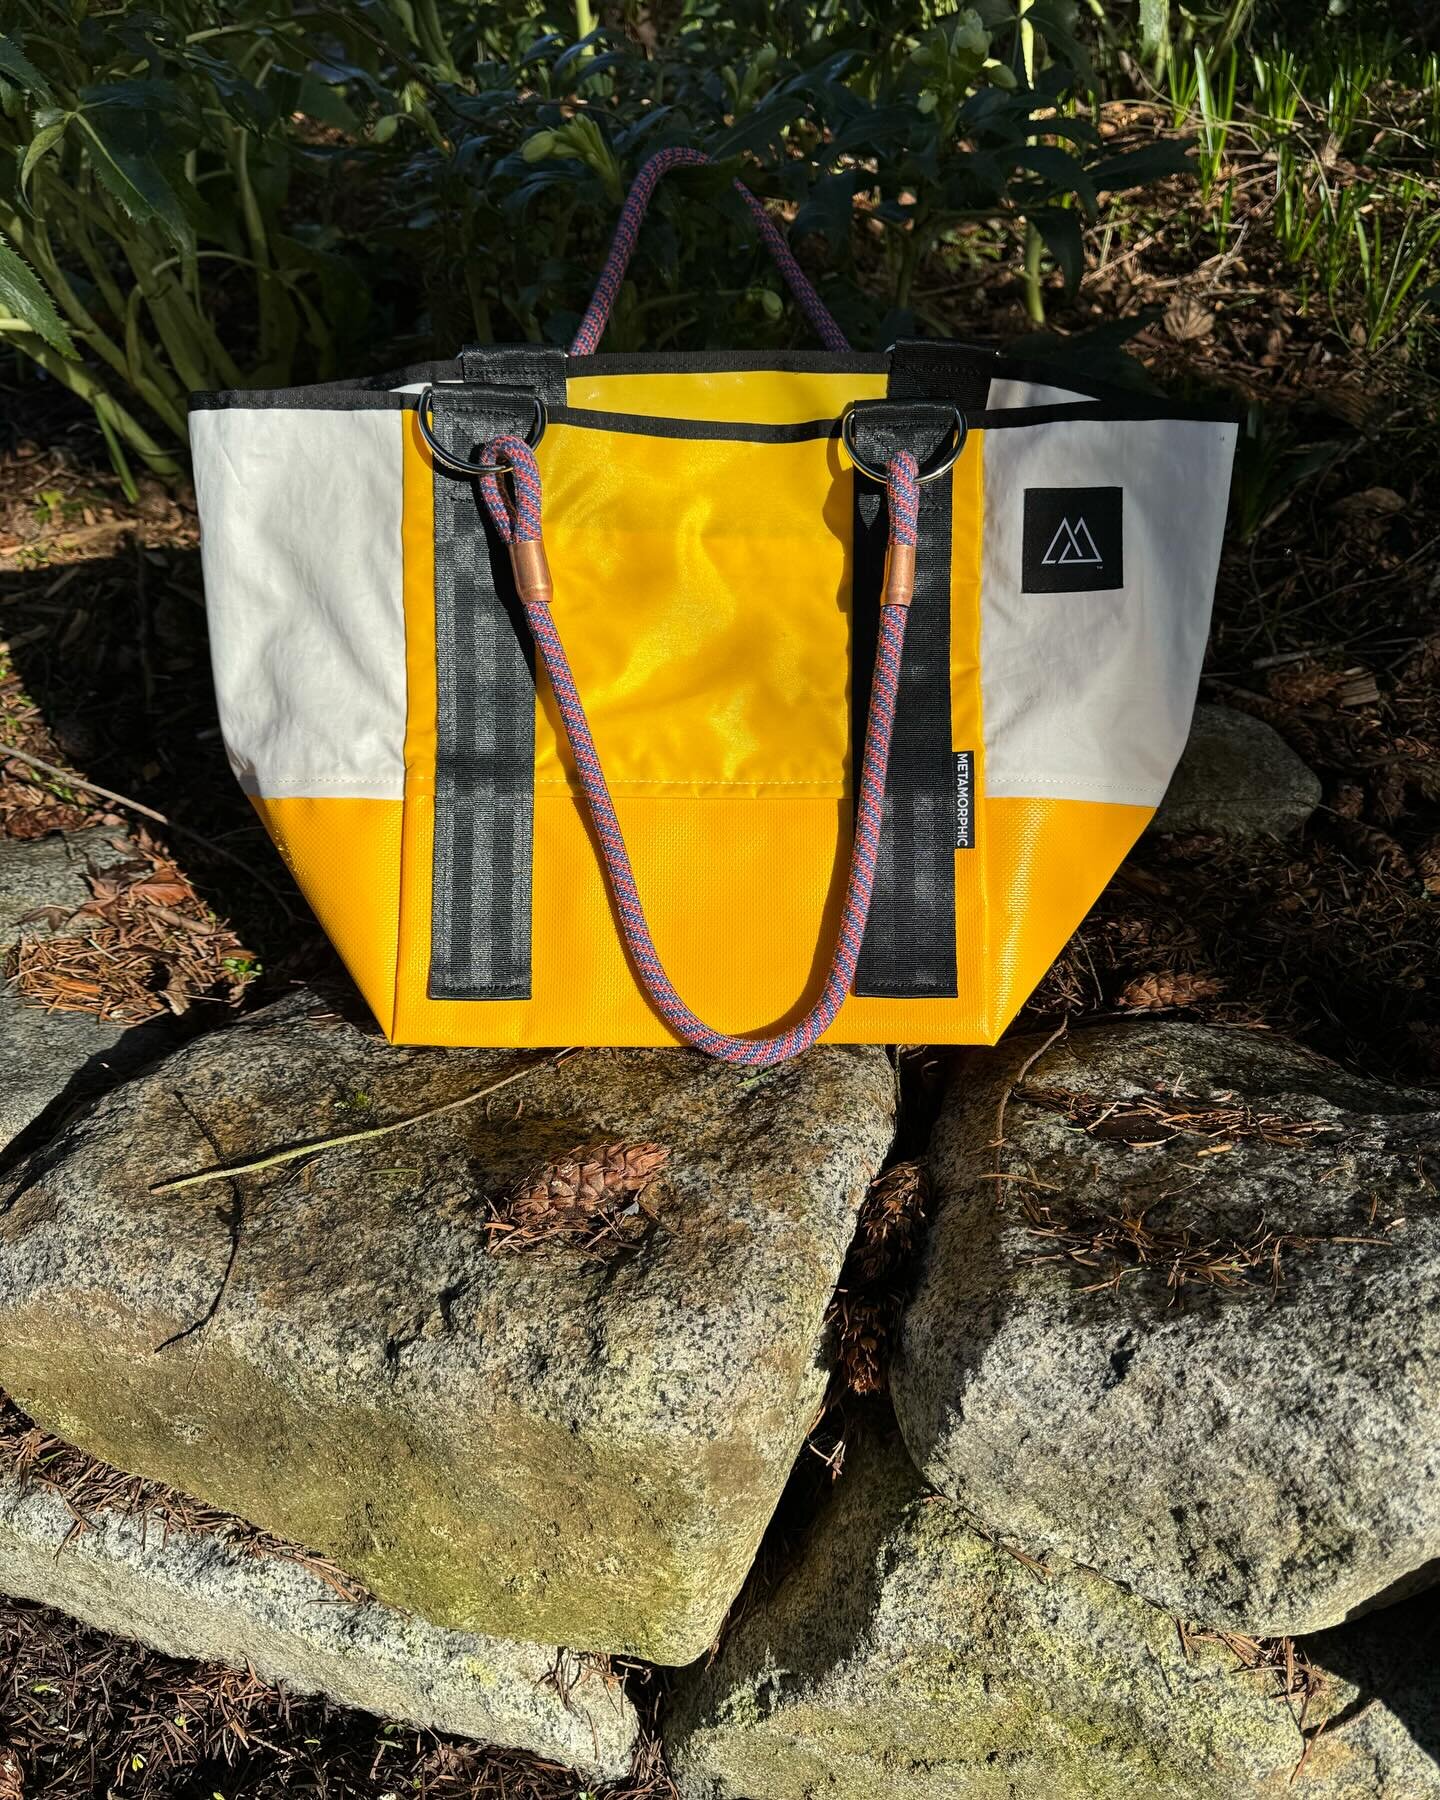 Next up on our valentine series💕, why not gift your loved one this beautiful one of a kind bright yellow marble boat tote with colorful handles perfect for fun spring activities!🌼 Made sustainably♻️ There is only one so get it while we have it! #ec